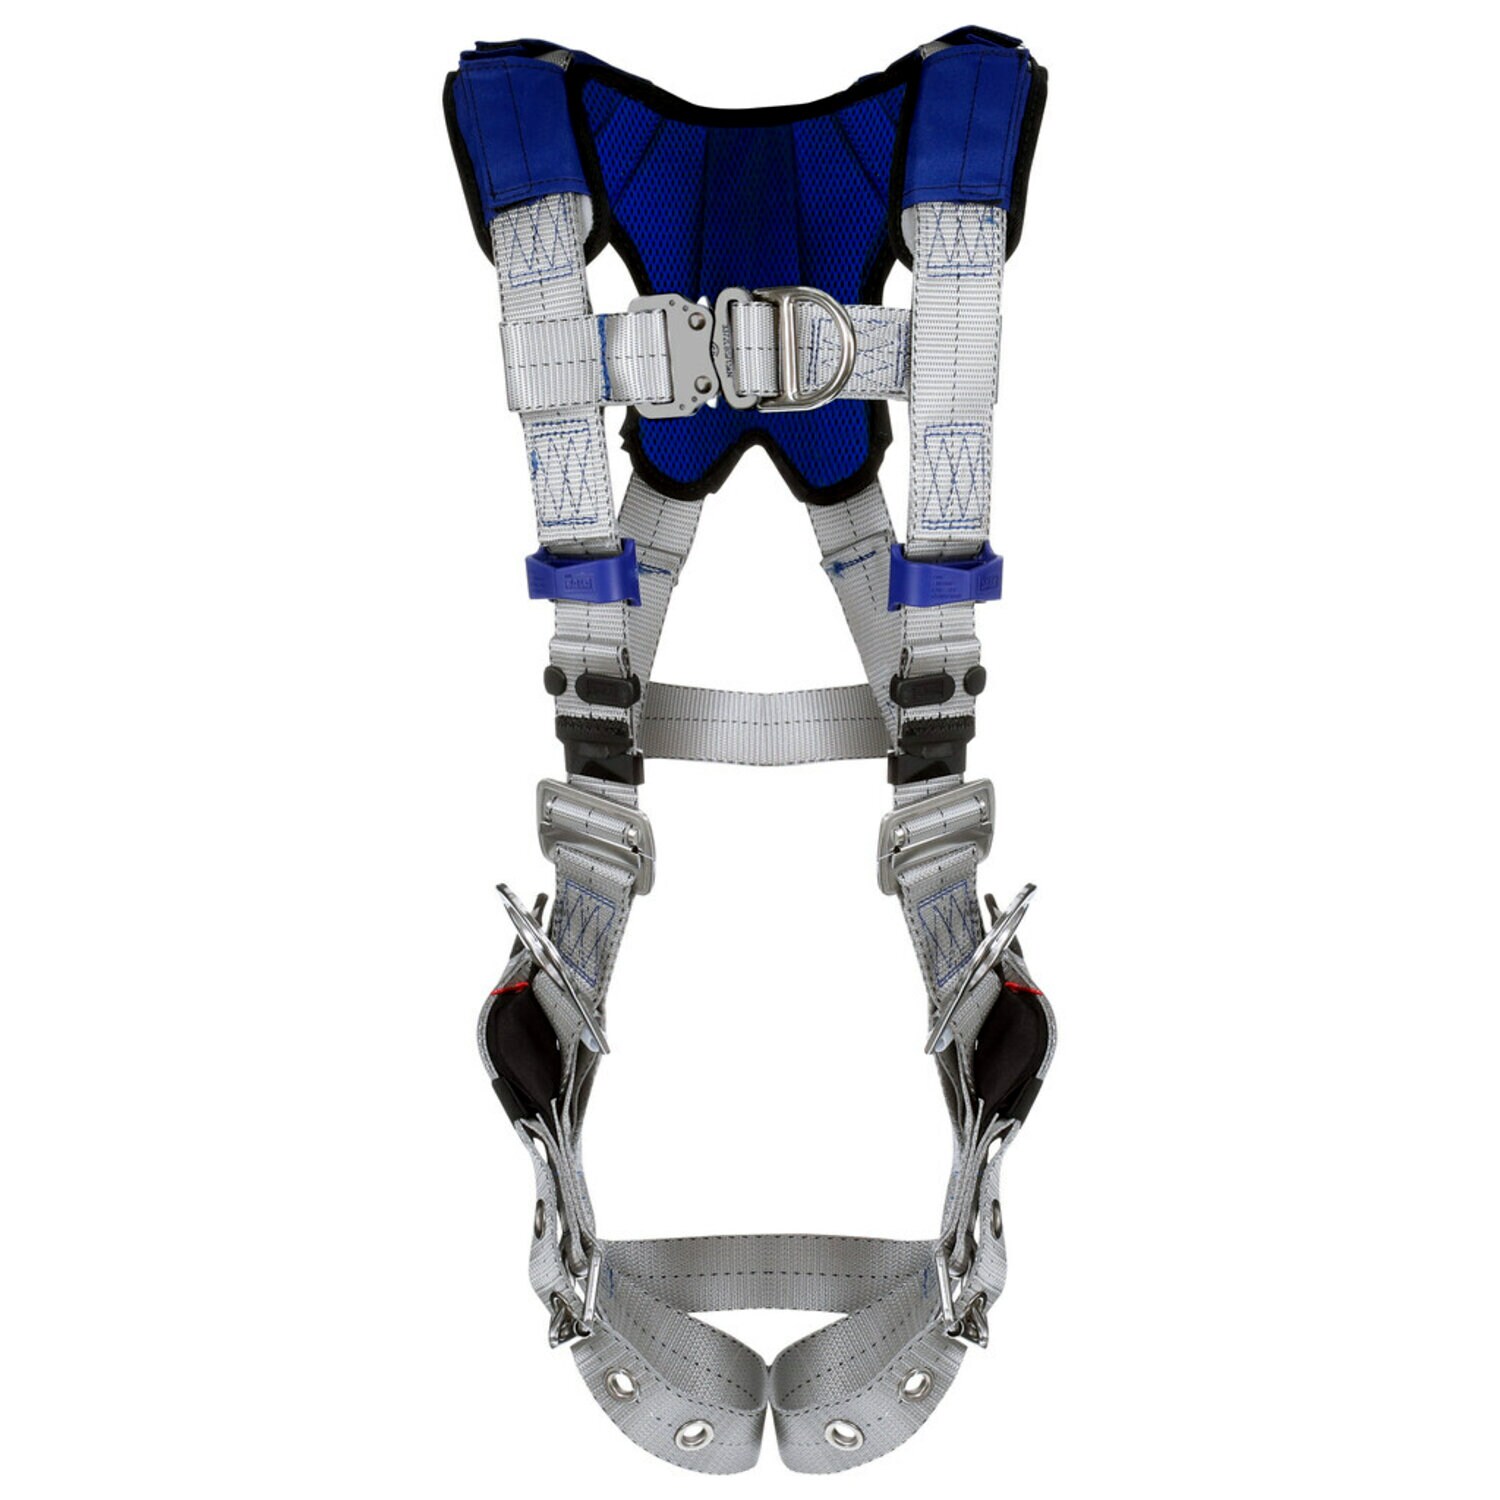 7012817701 - 3M DBI-SALA ExoFit X100 Comfort Climbing/Positioning Safety Harness 1401220, 3X, Stainless Steel Hardware